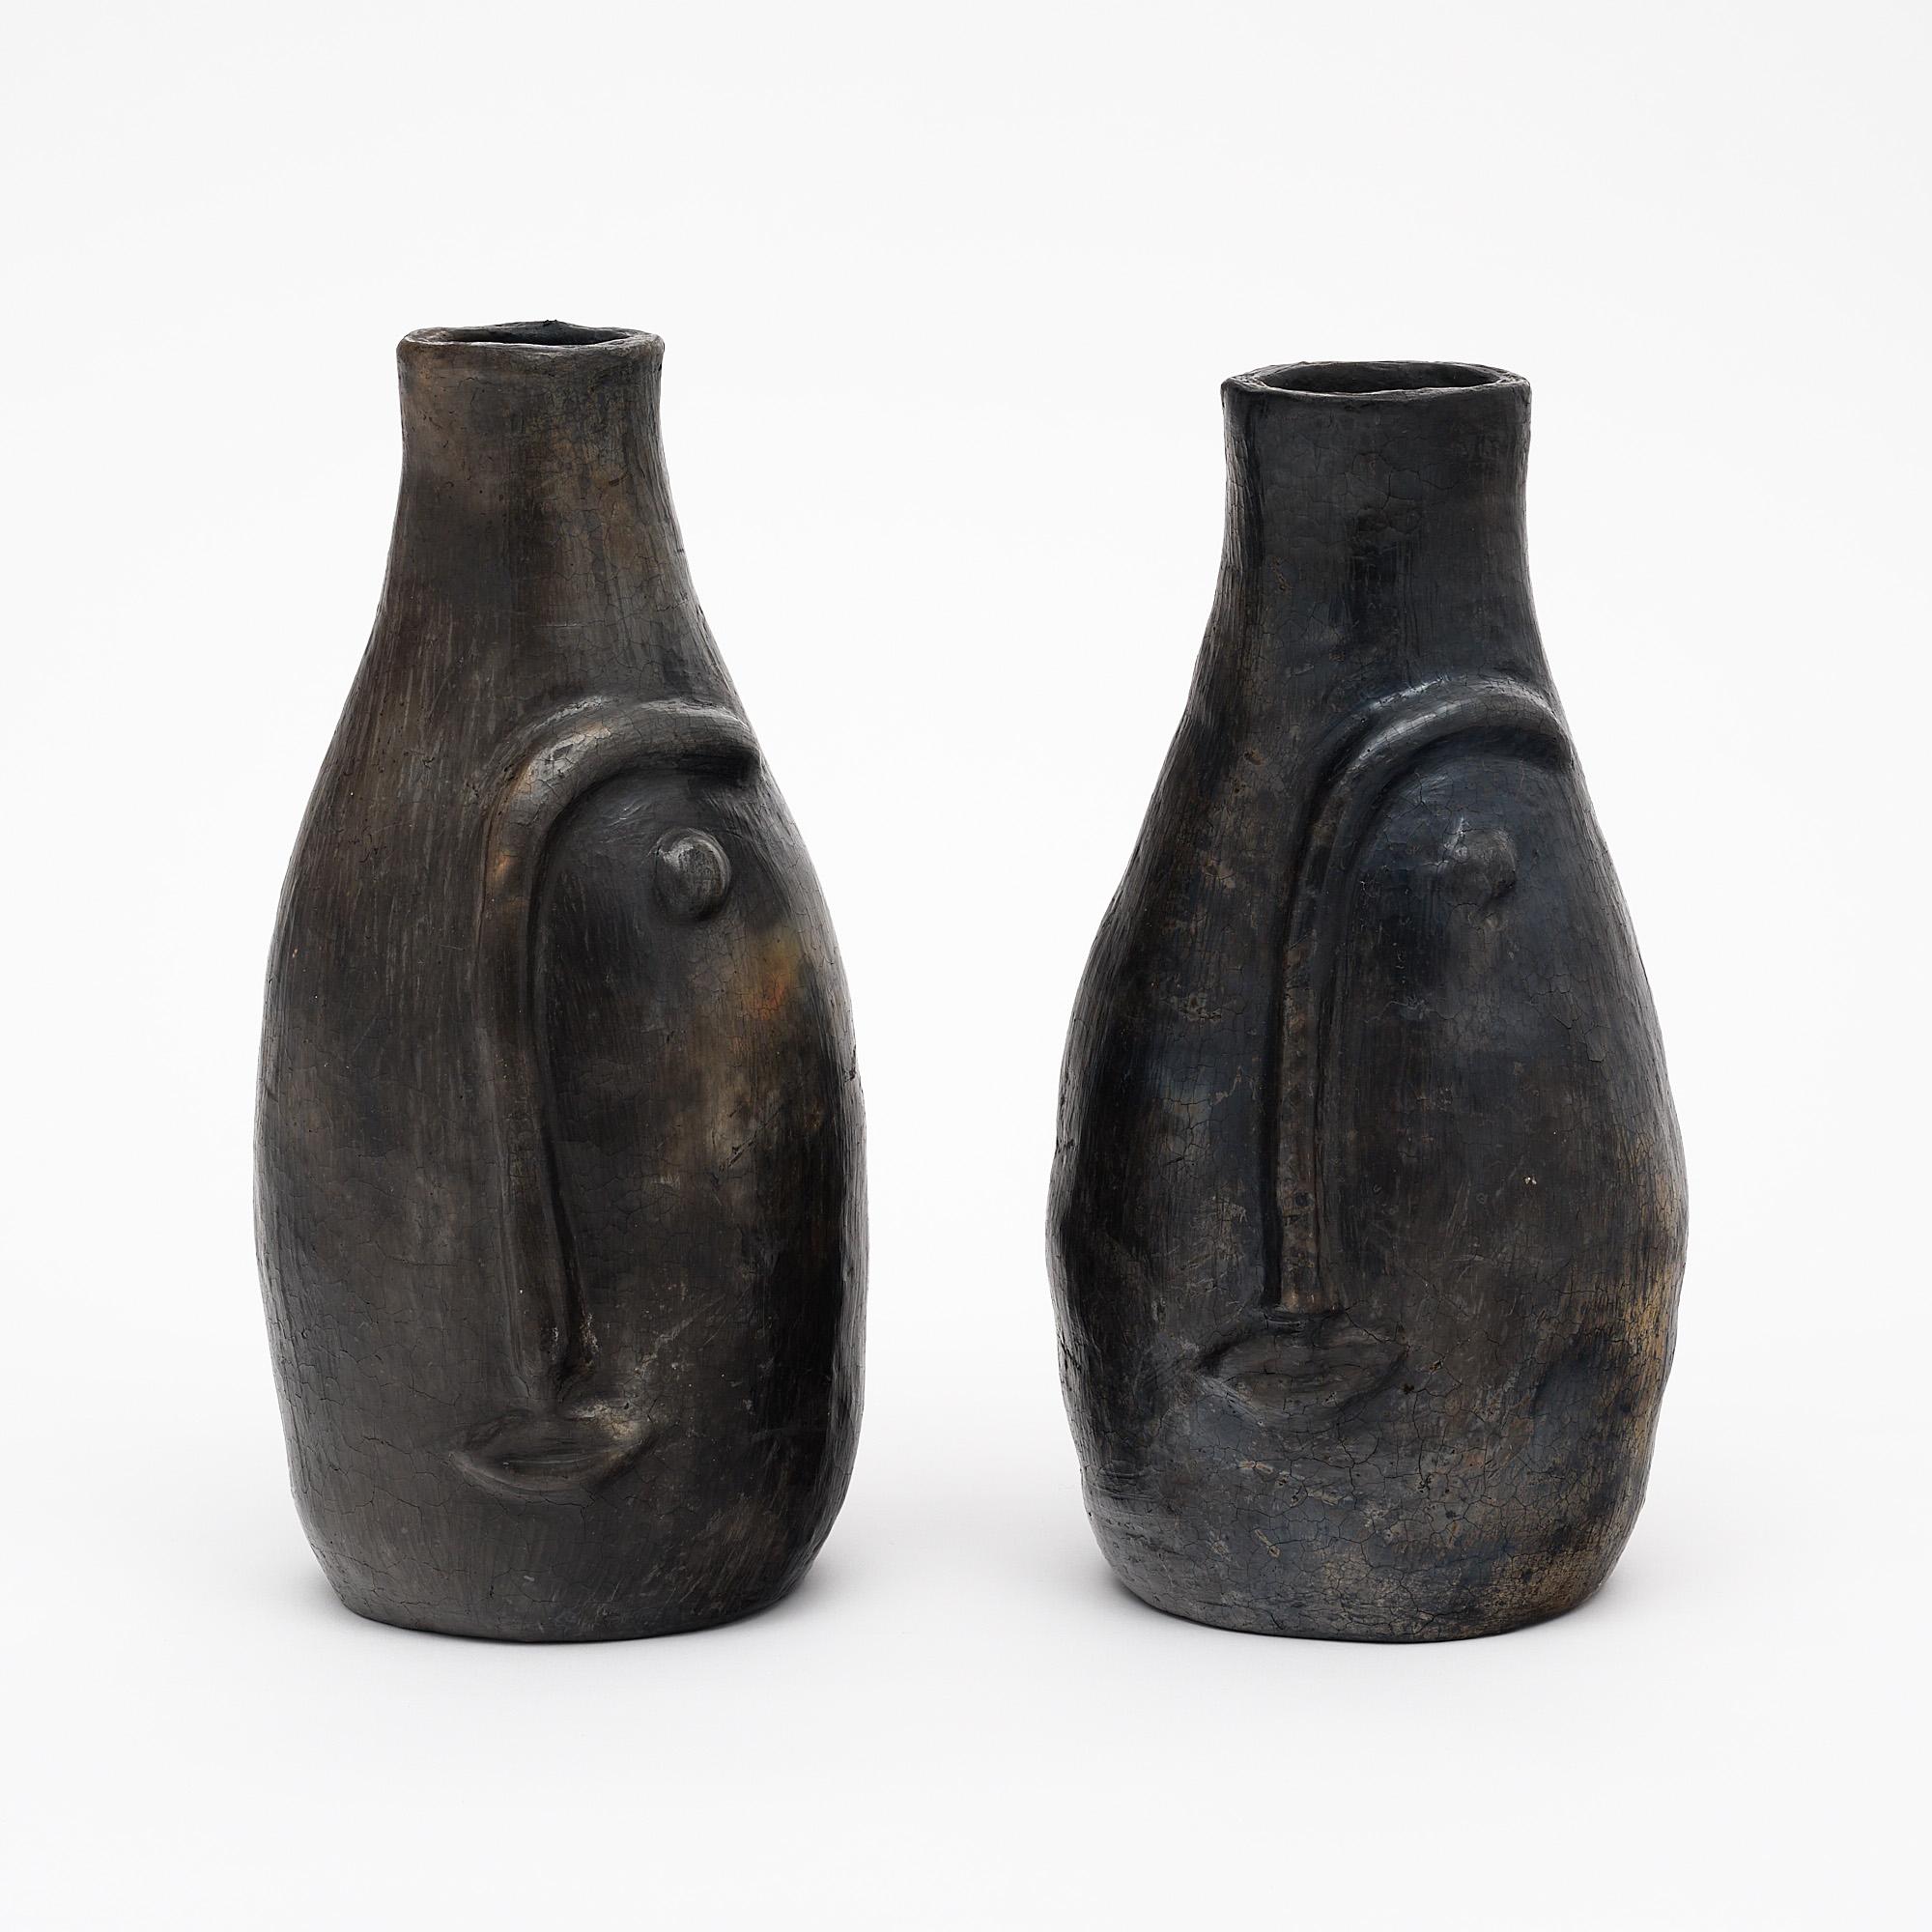 Pair of vases, French, of pigmented terra cotta. The vases are hand made in the tradition of Vallauris, on the French Riviera. The vases boast stylized Modernist facial features and a beautiful patina.